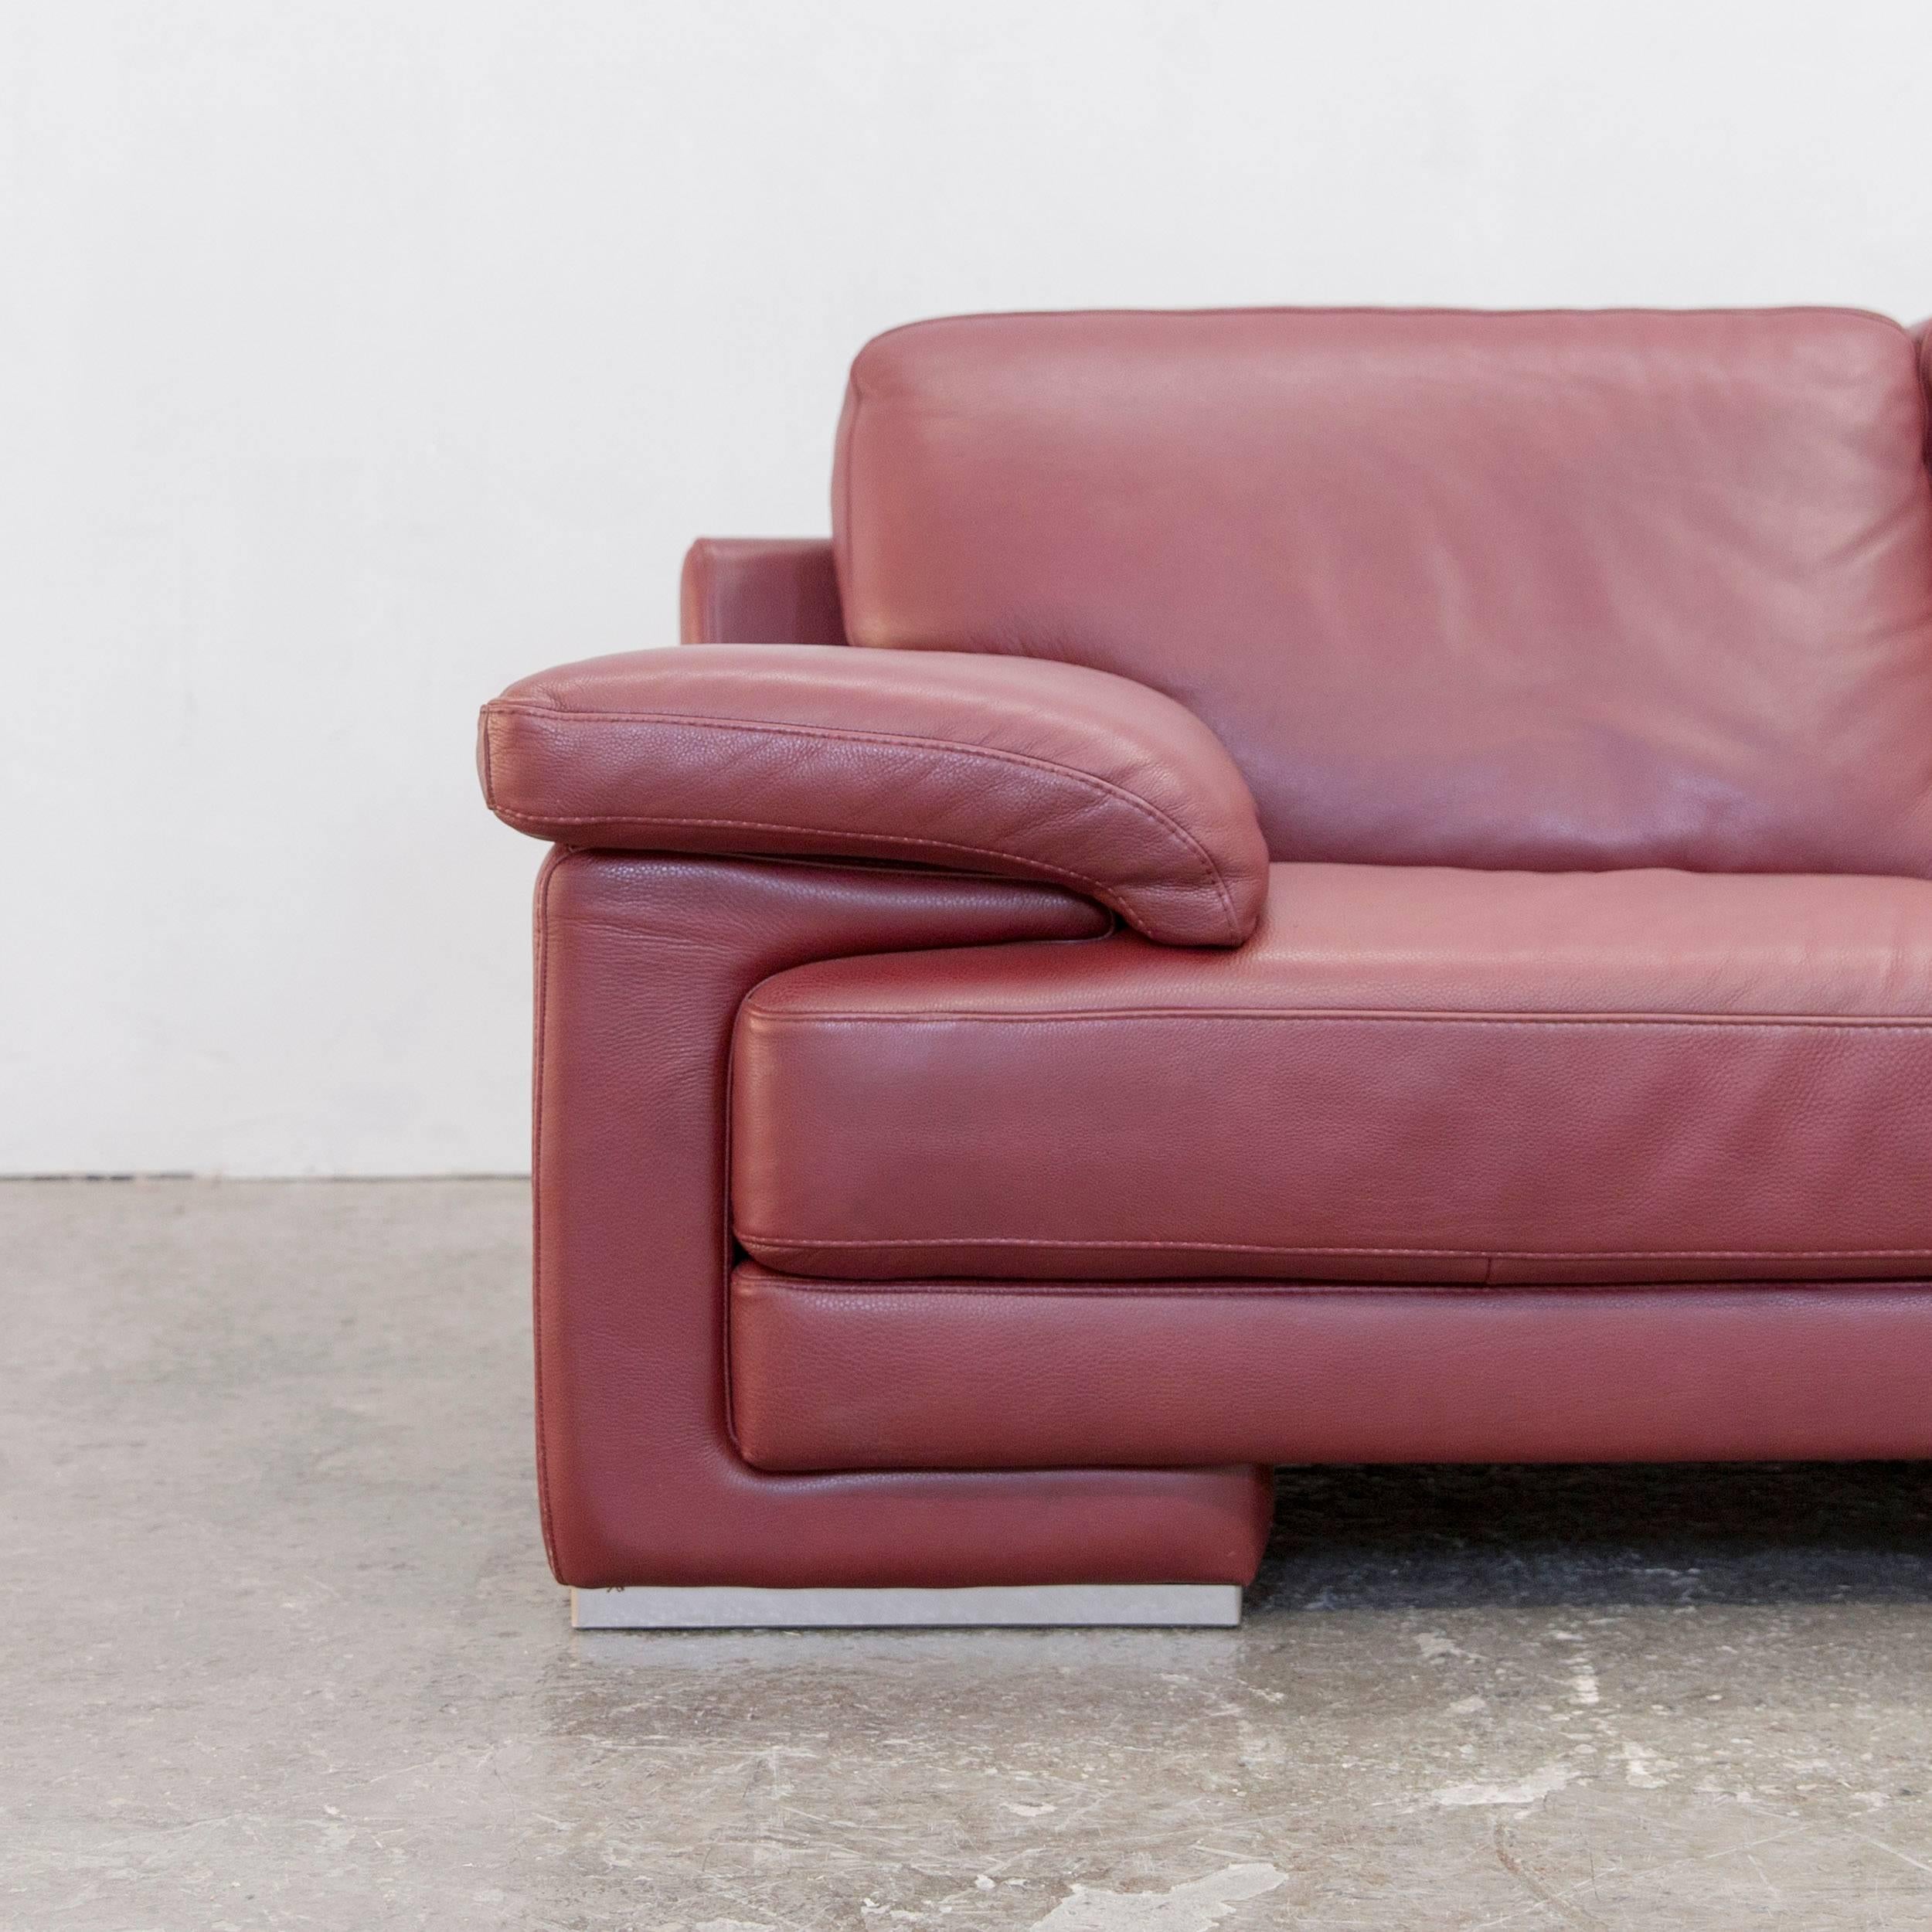 Authentic leather Natuzzi couch in red.